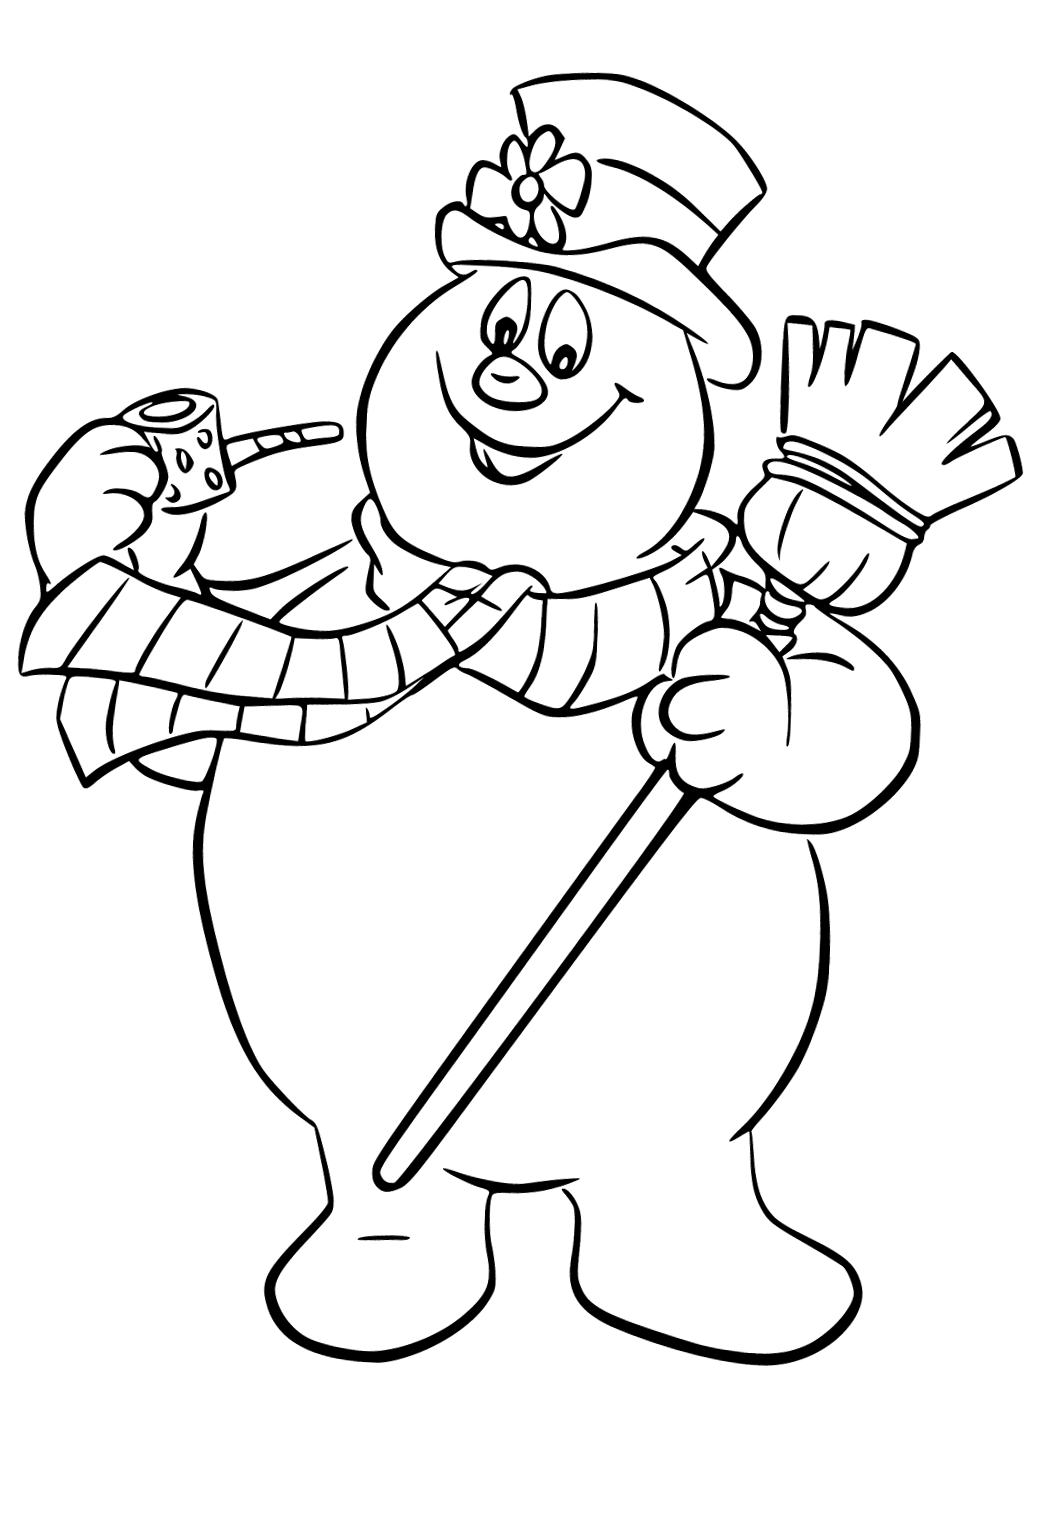 Free printable frosty the snowman hero coloring page for adults and kids